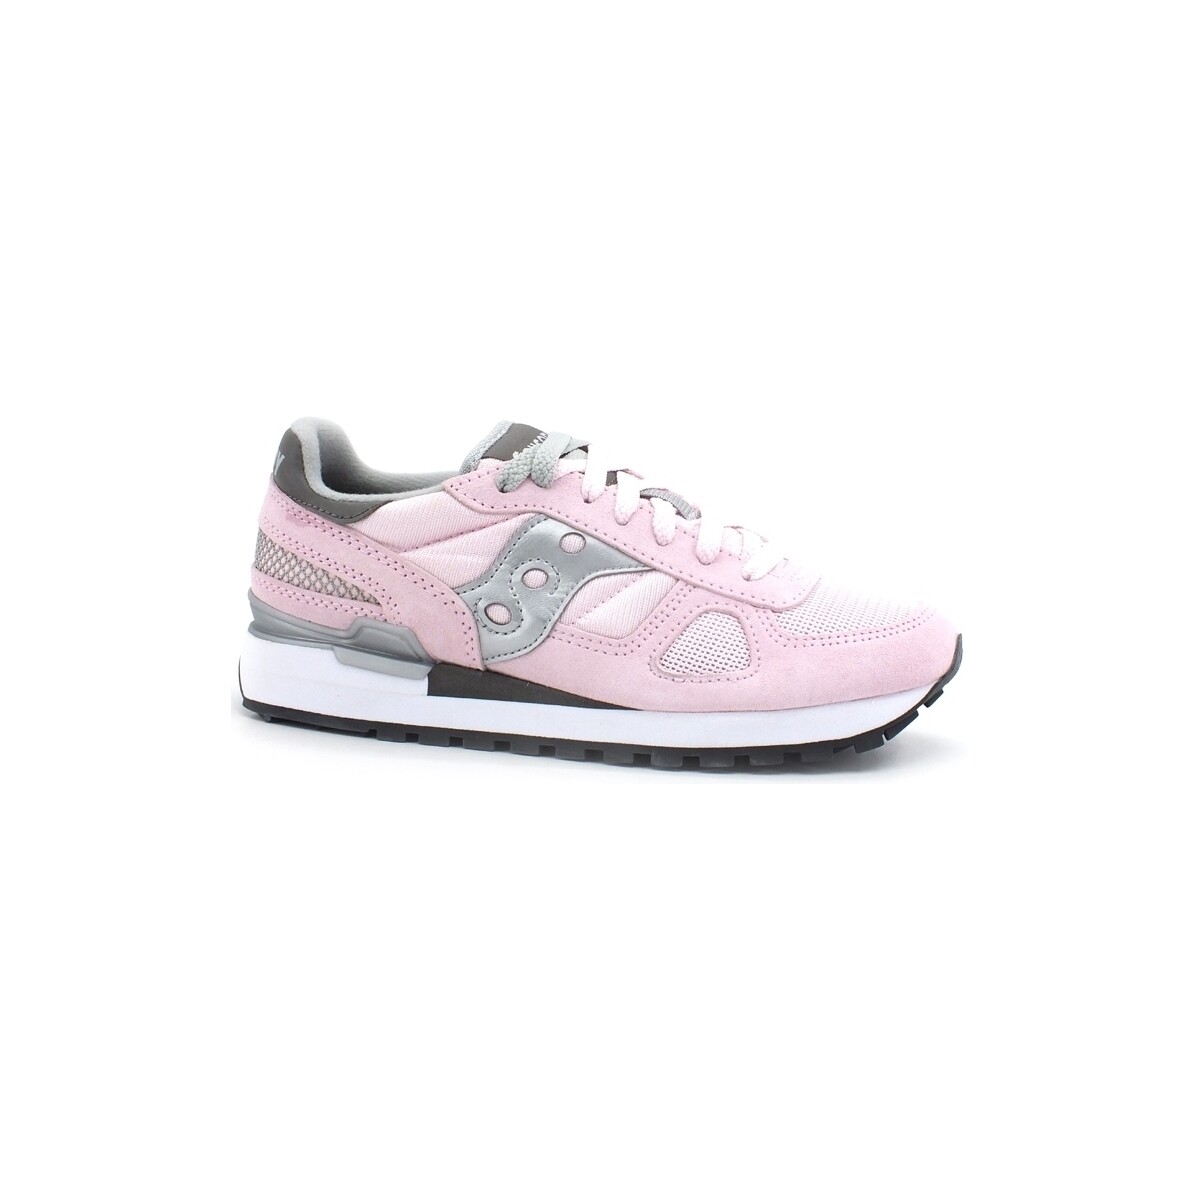 Chaussures Femme Bottes Saucony Shadow W Sneaker Pink Brown Silver S1108-780 Rose